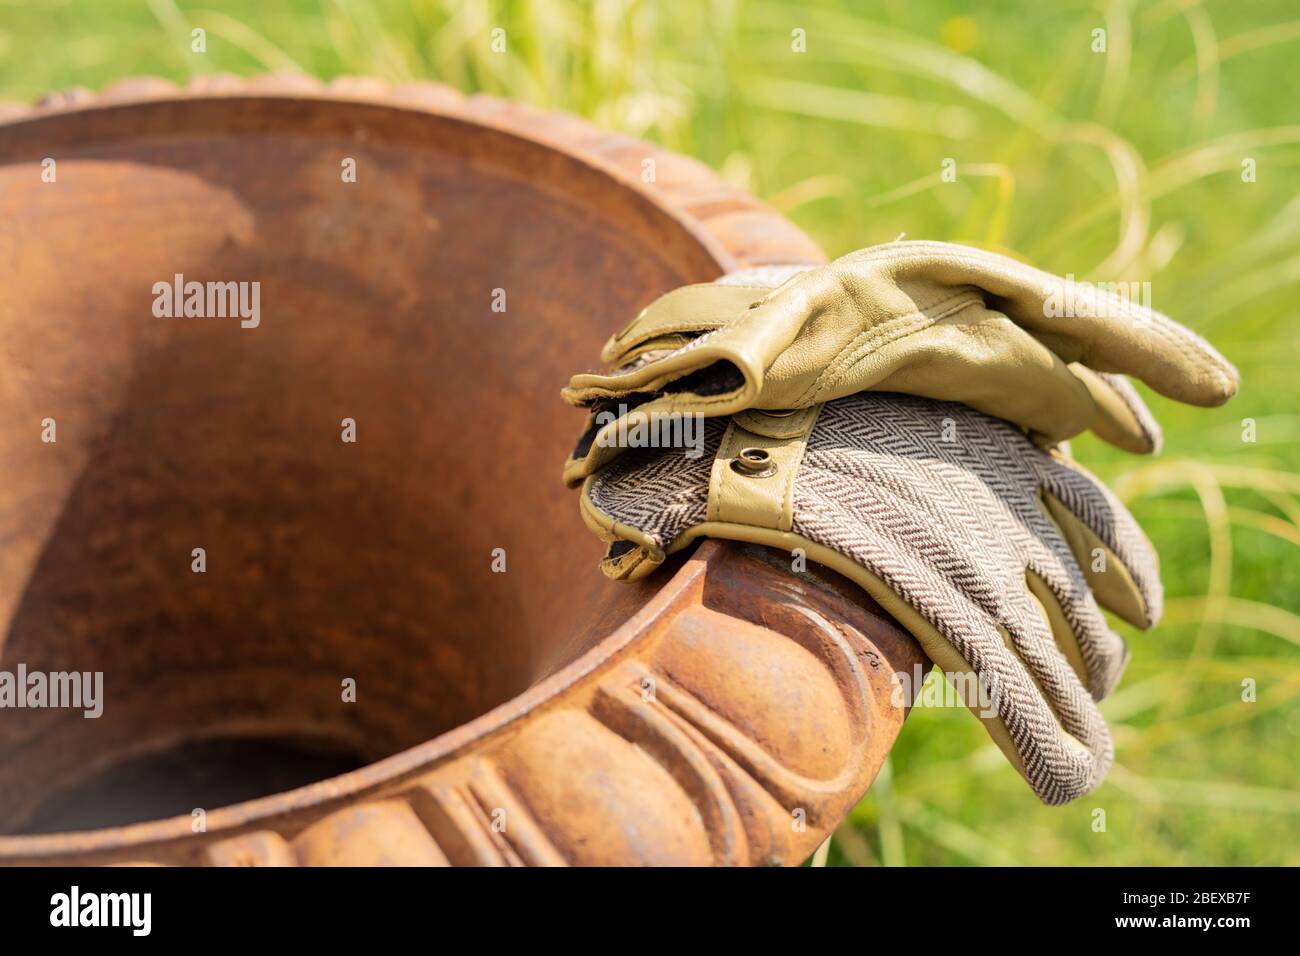 Garden gloves rest on the rim of a amphora after garden work is done Stock Photo